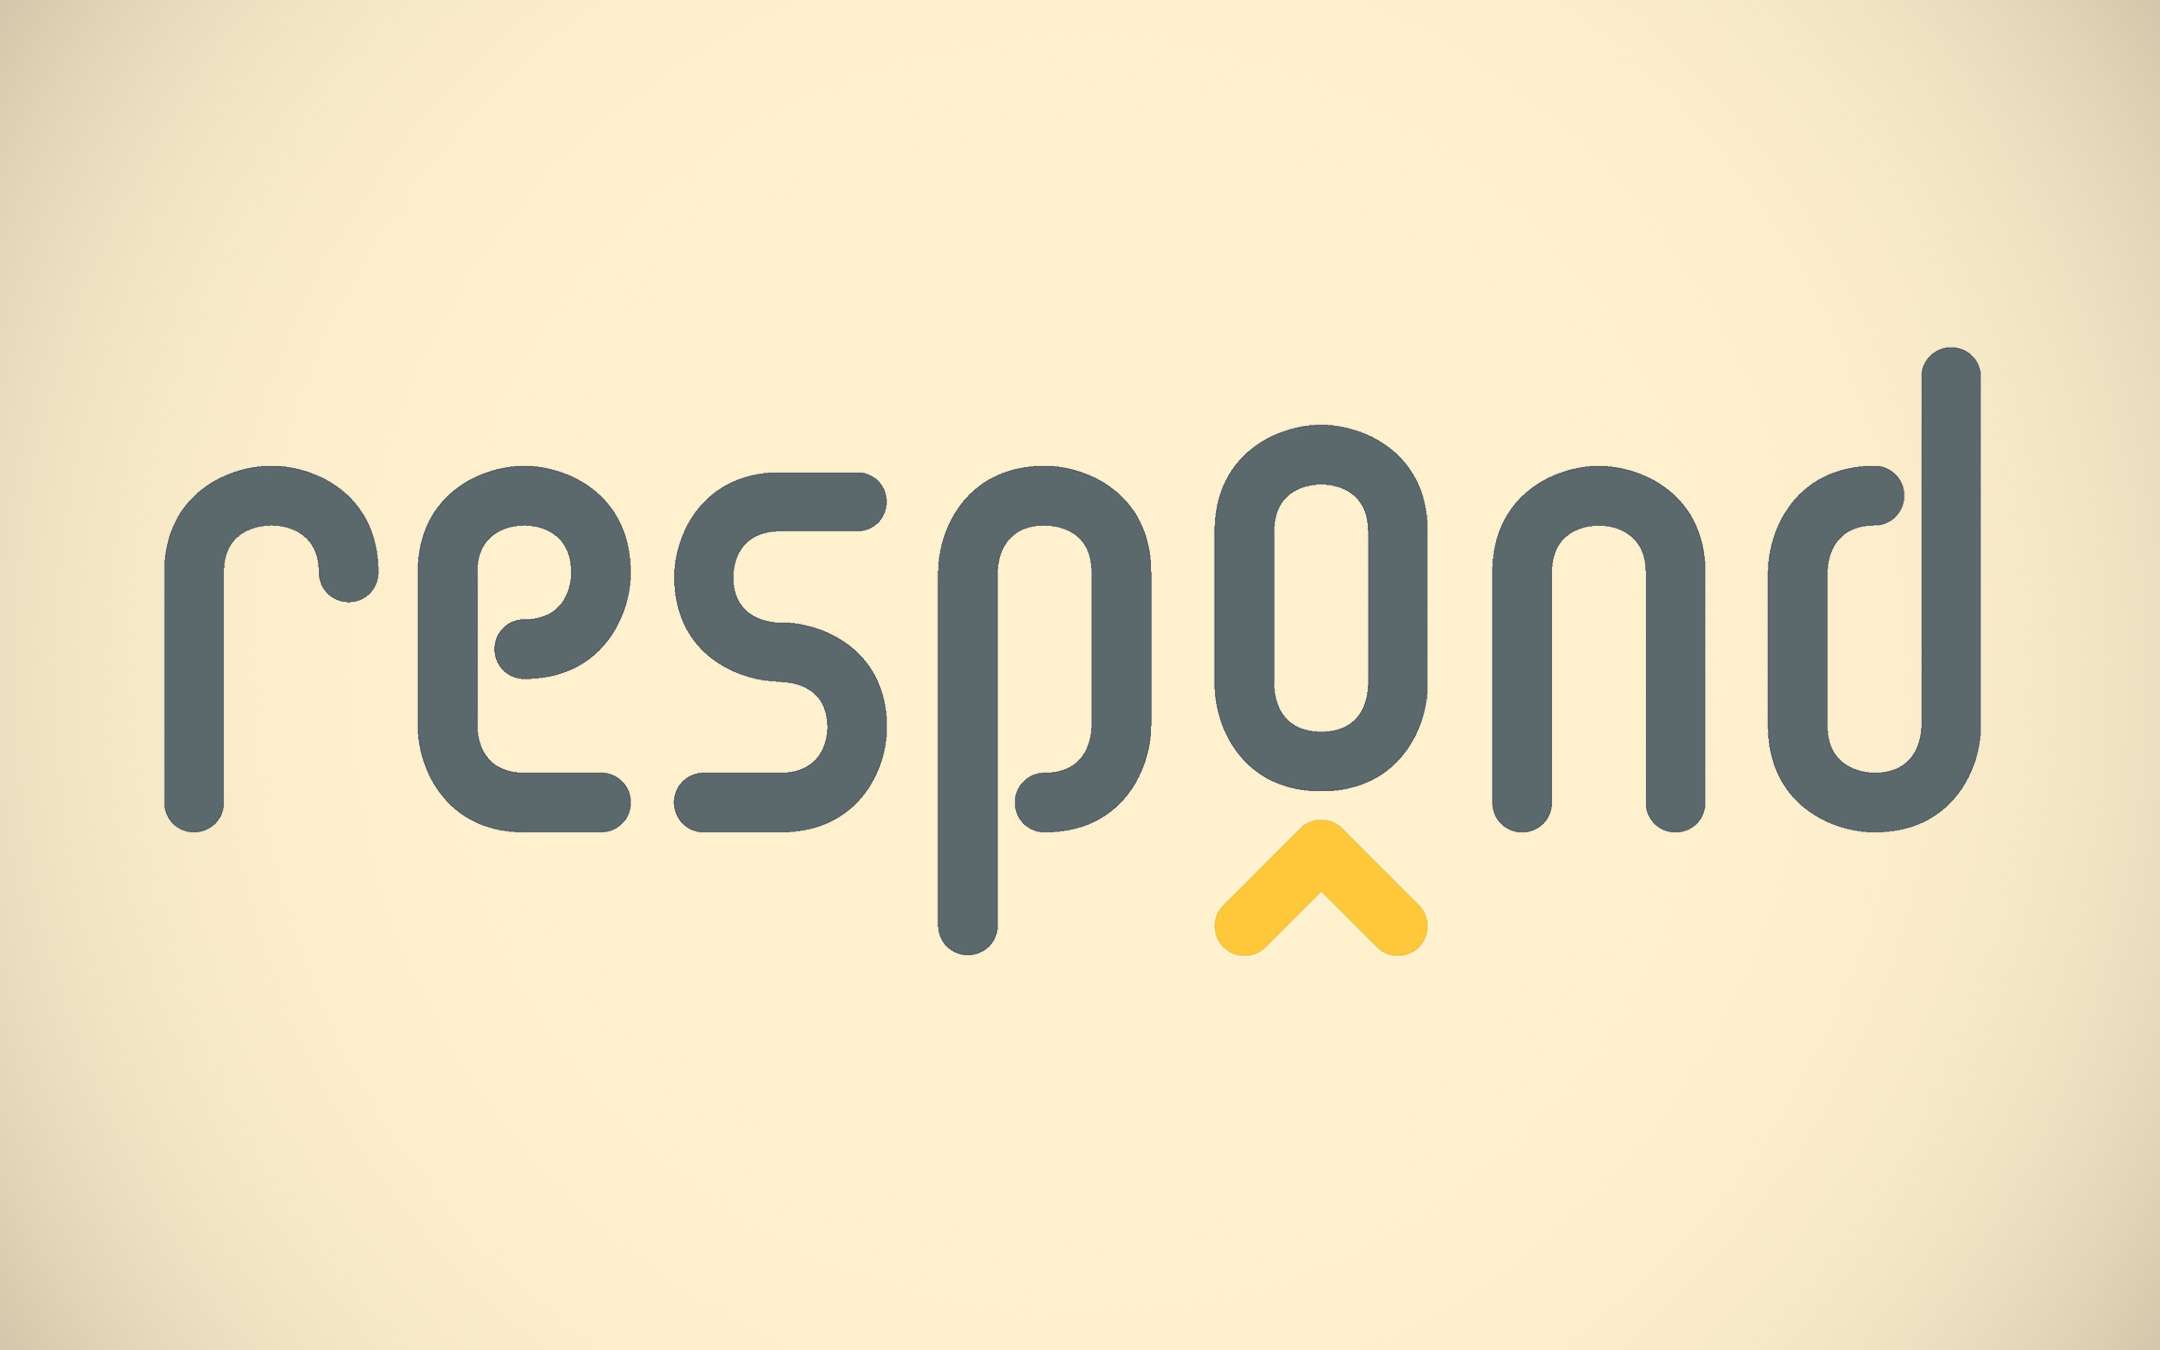 Respond Software is the new acquisition of FireEye